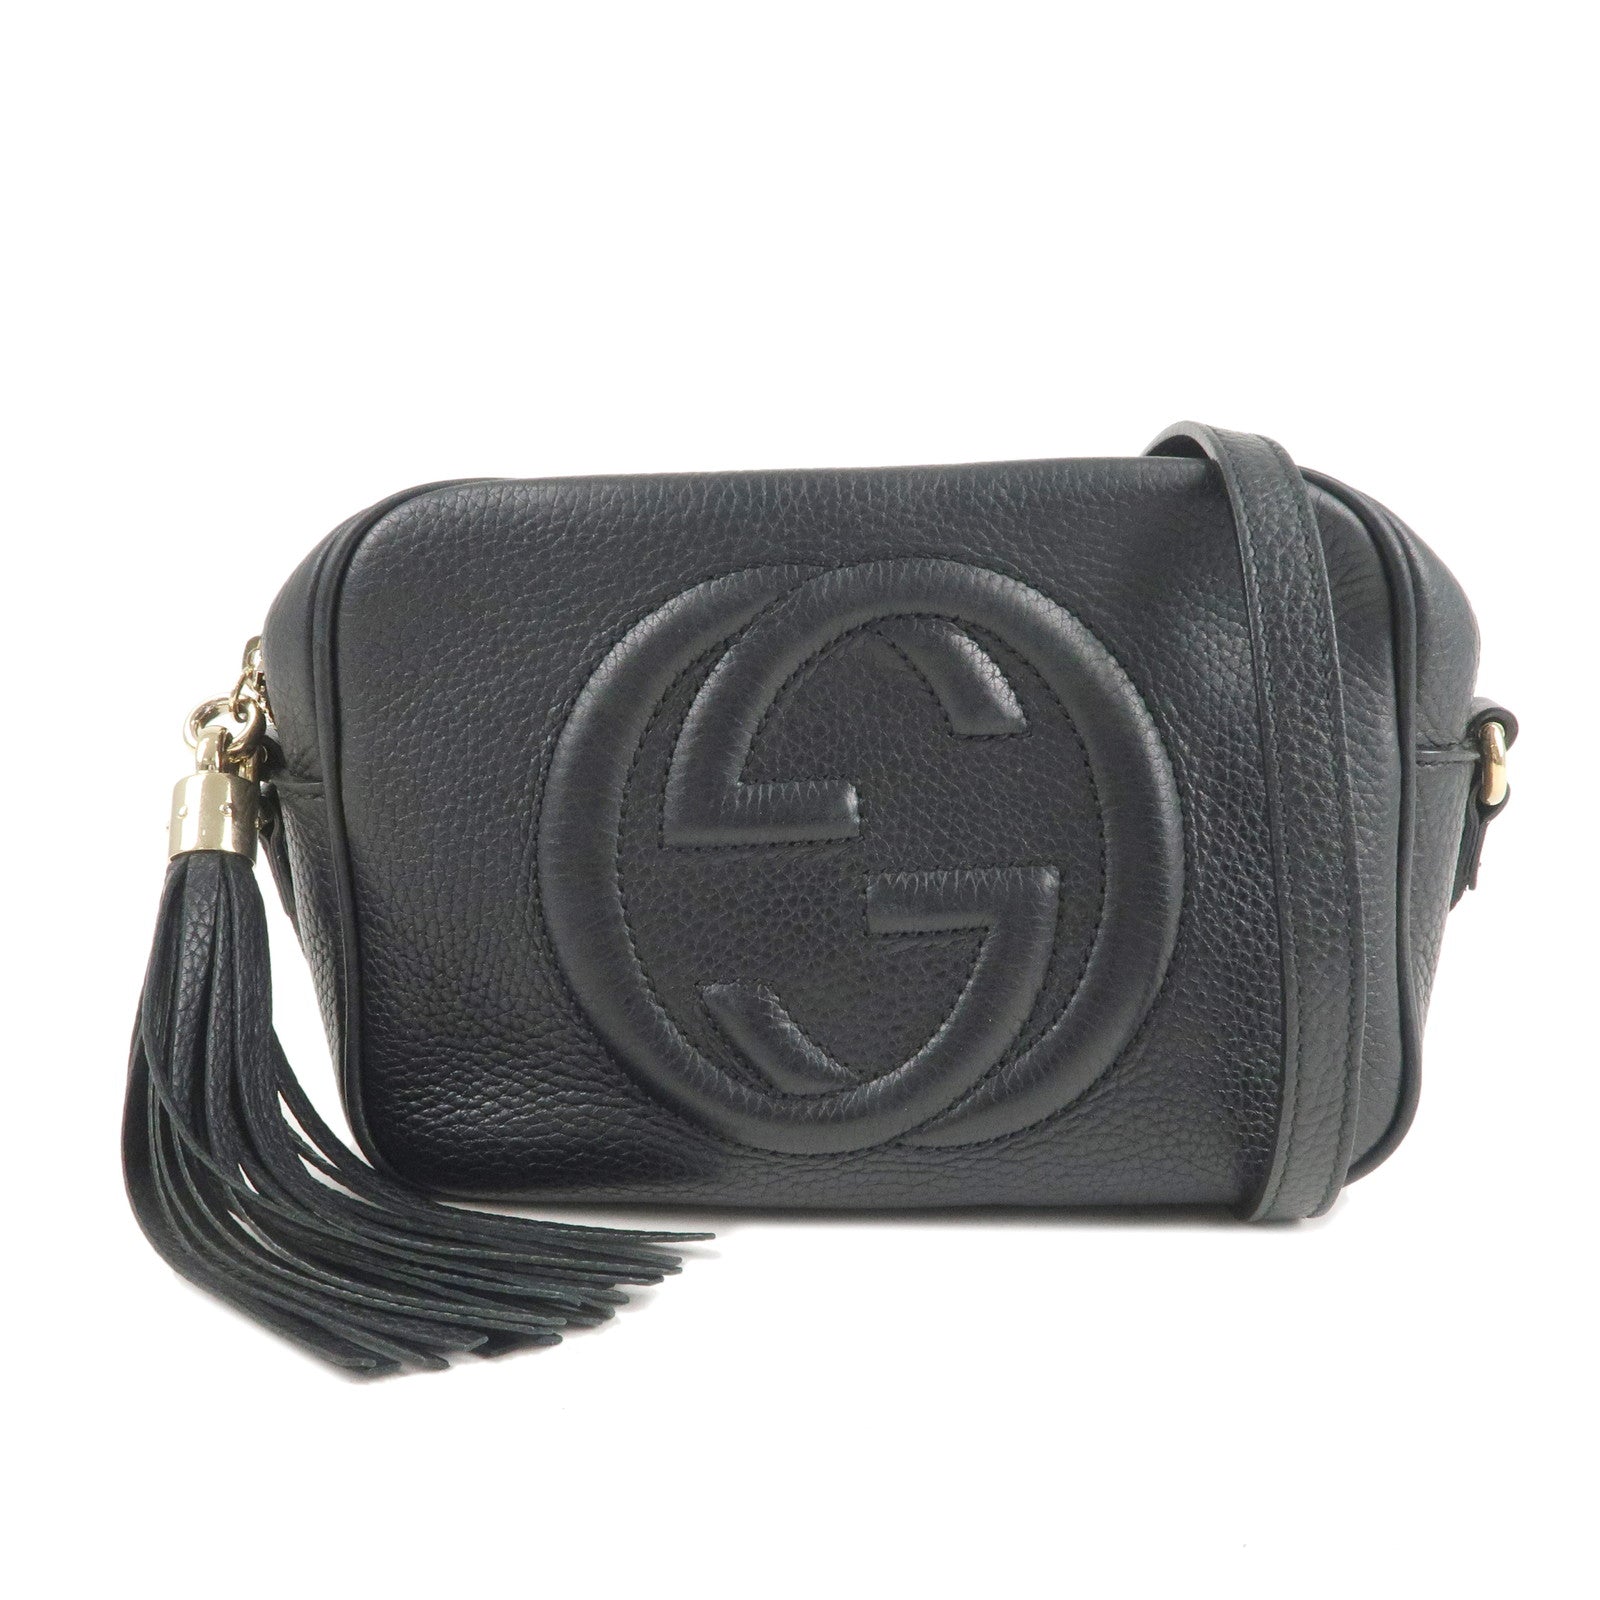 GUCCI Soho Disco Pebbled Leather Crossbody Bag Red 308364